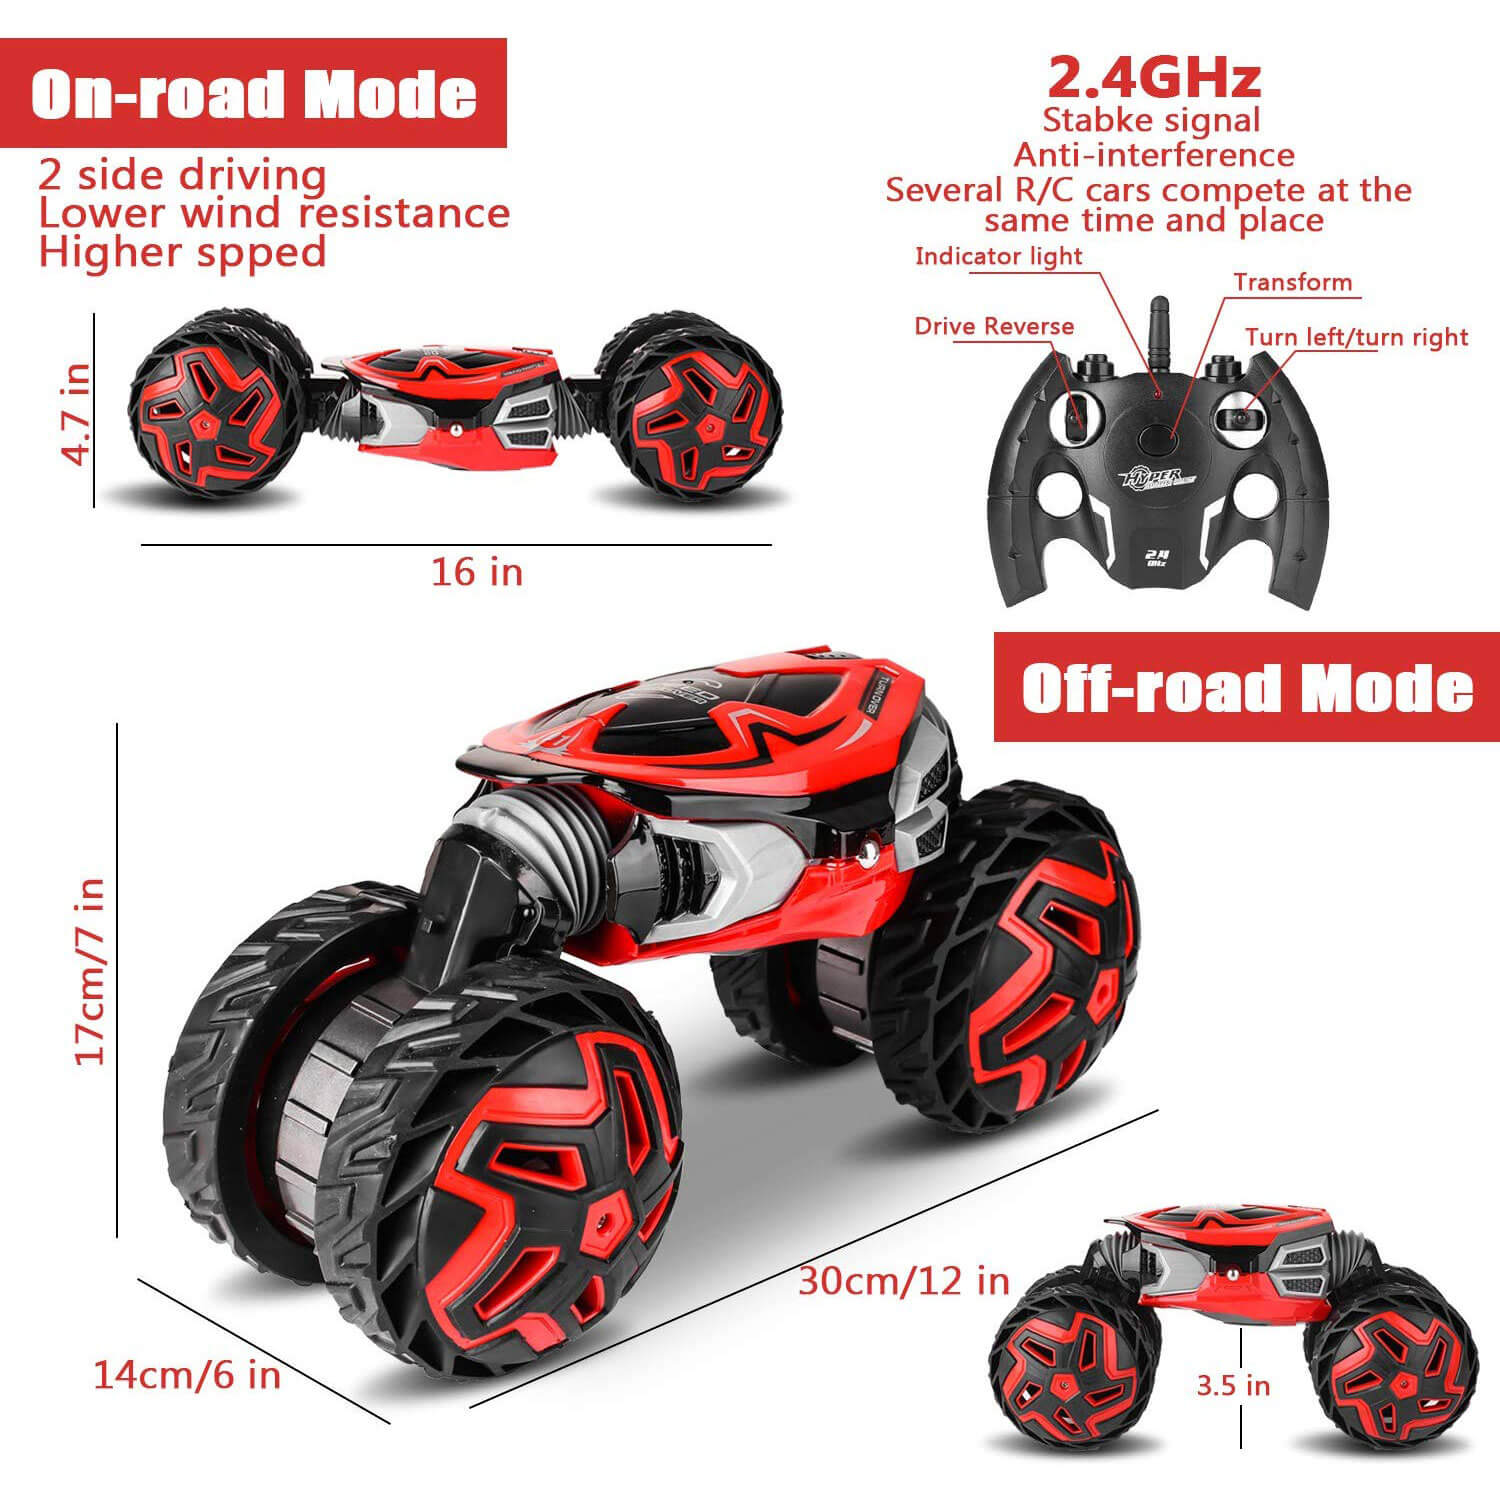 RC Cars For Kids - 1:12 Rugged Remote Control Car 2.4Ghz Off-Road dual motors Rock Crawler Transform All Terrains